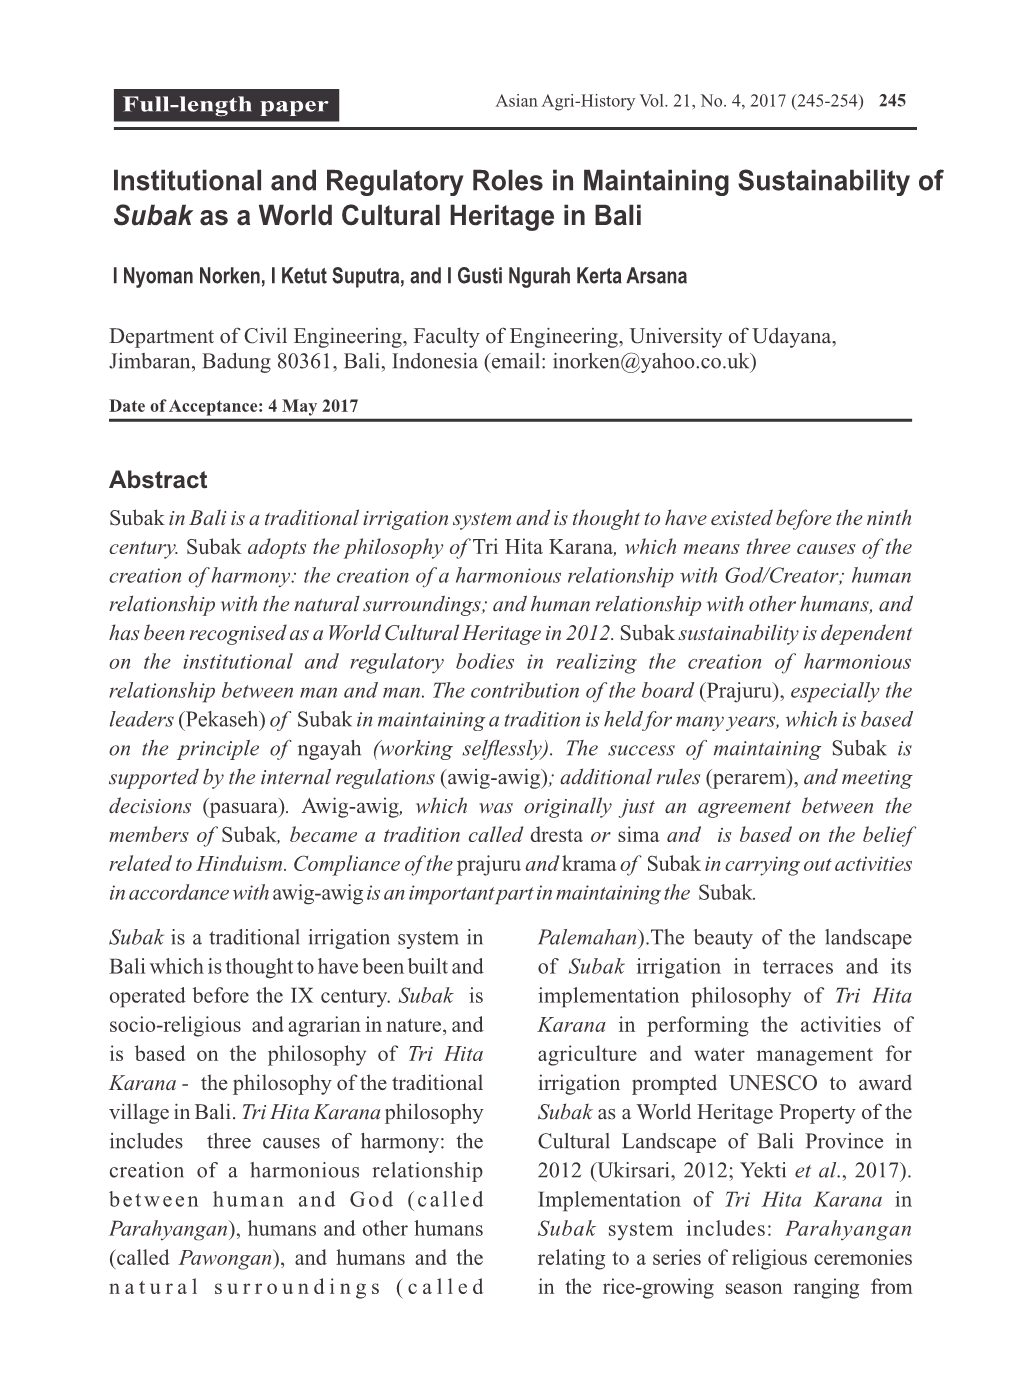 Institutional and Regulatory Roles in Maintaining Sustainability of Subak As a World Cultural Heritage in Bali